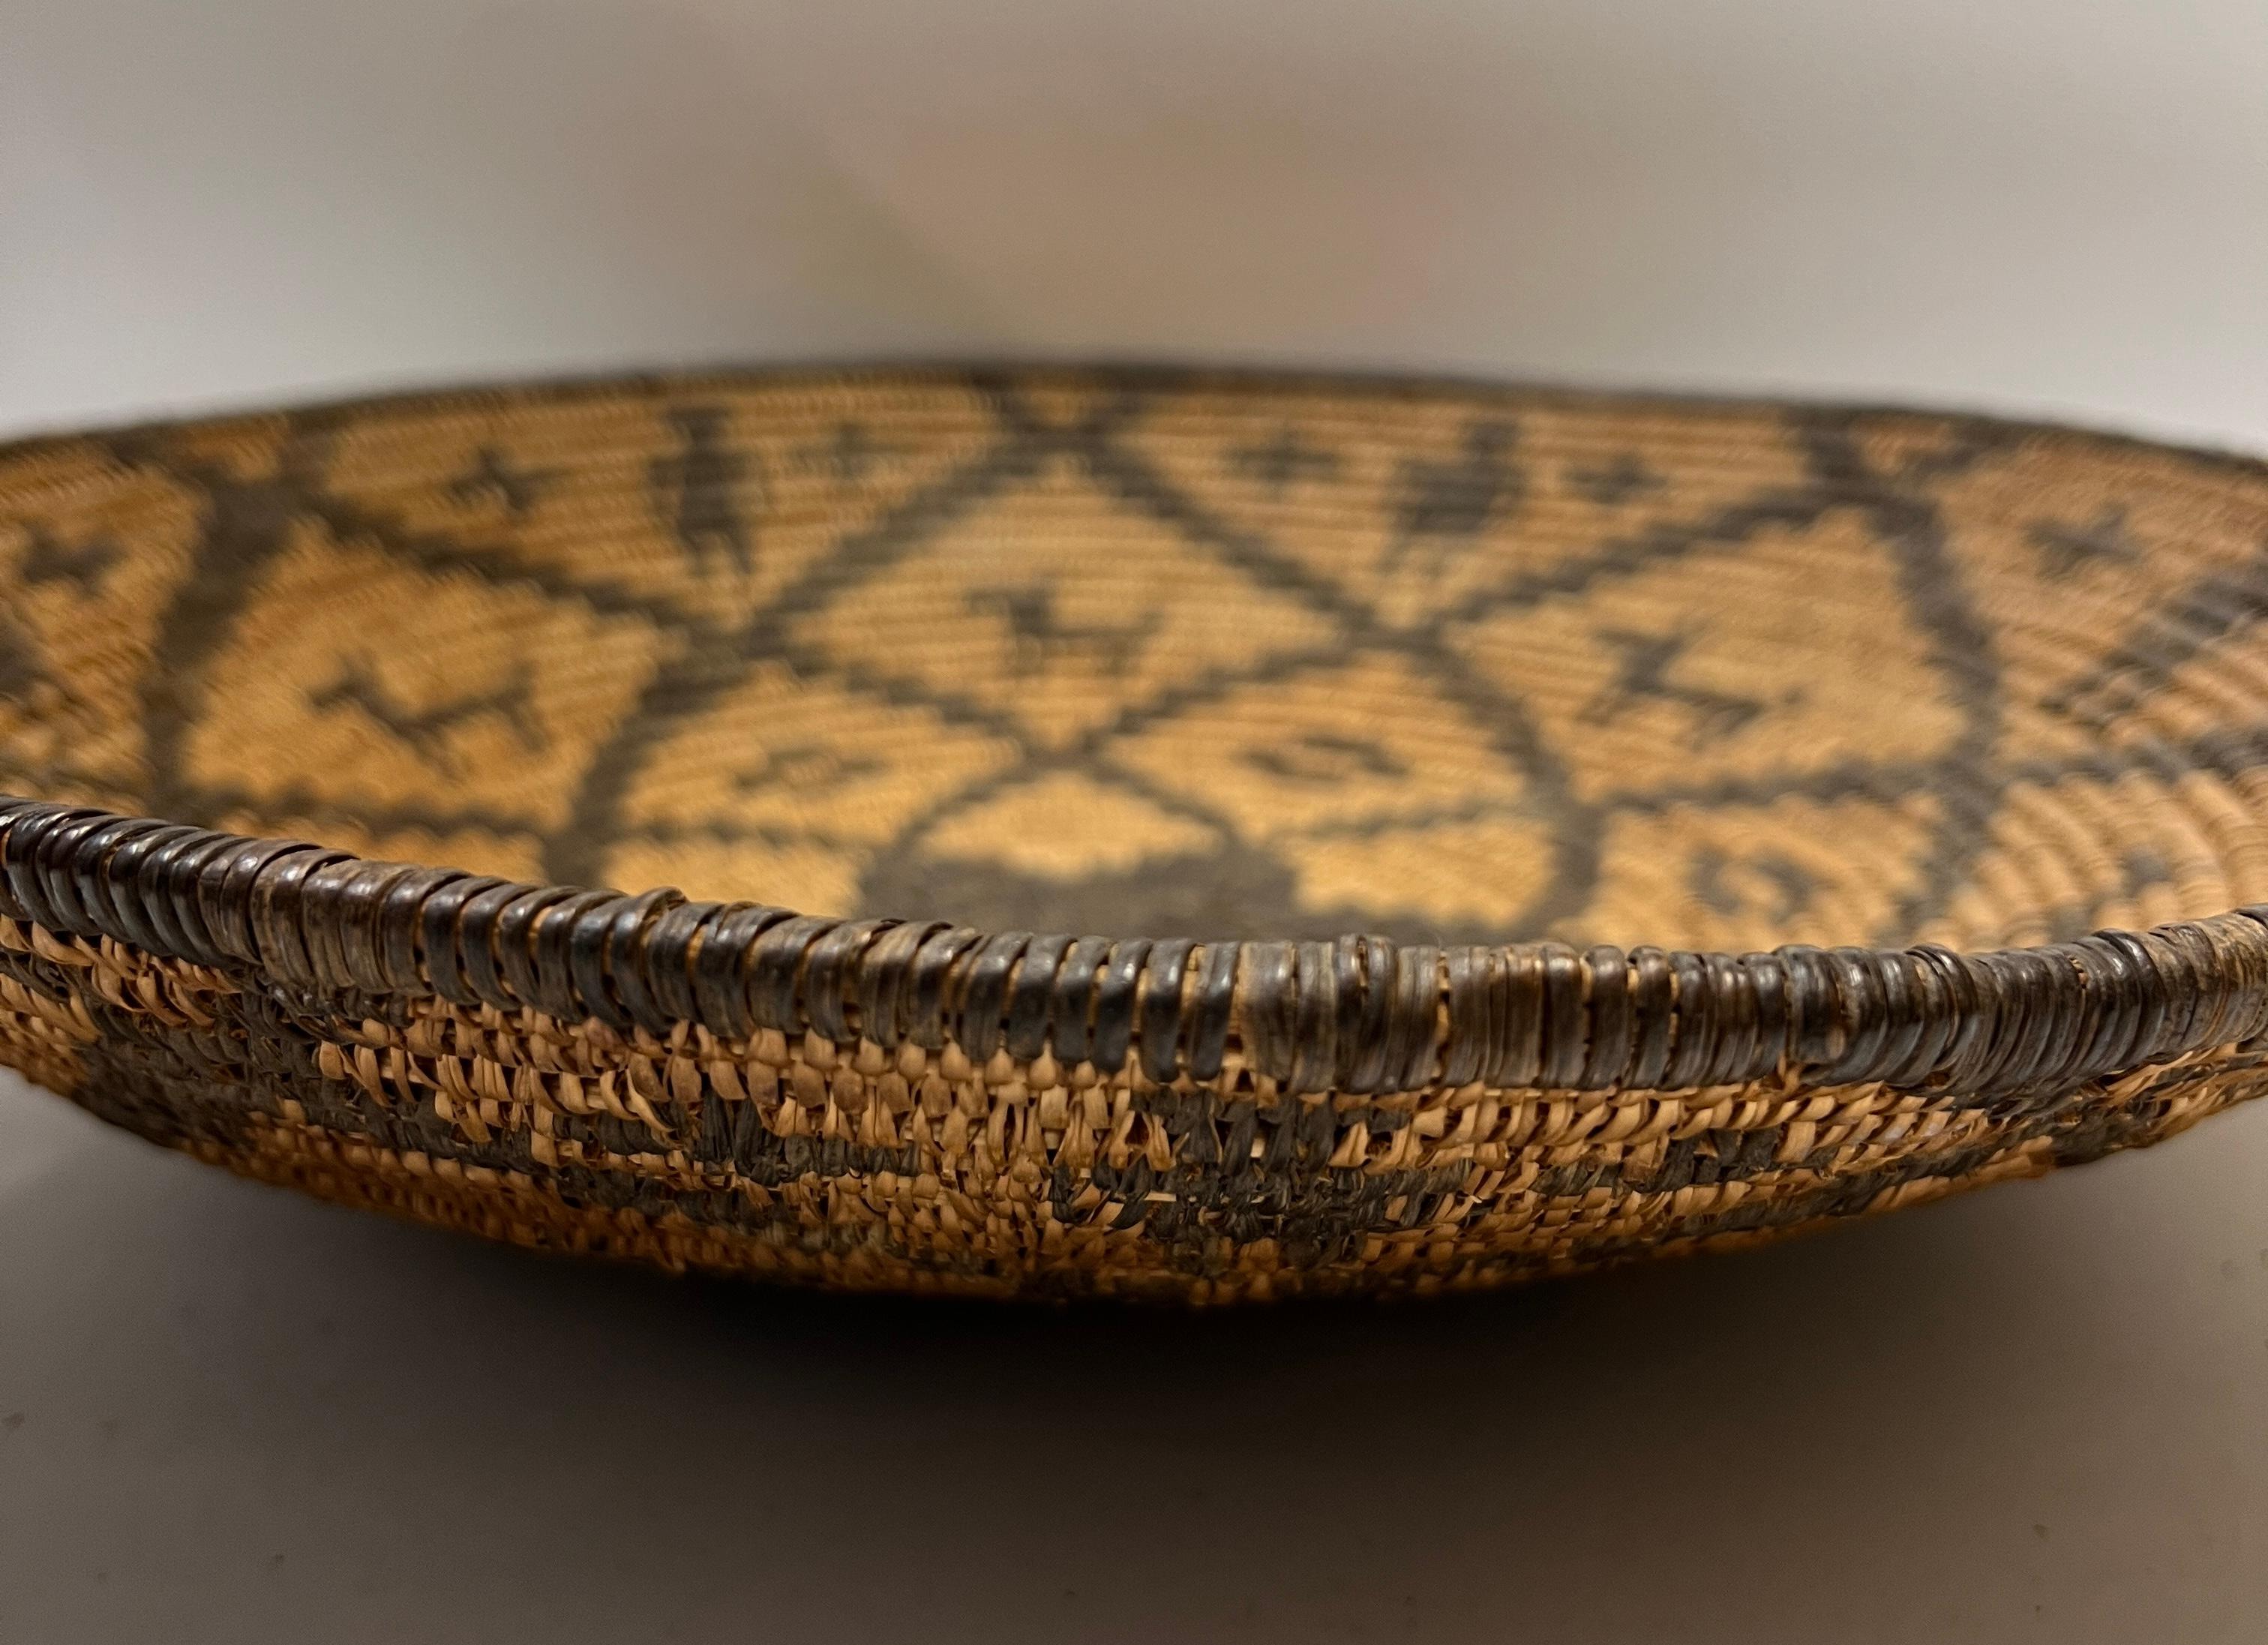 Woven Apache Basket with Dog and Human Motif
Late 19th century - Early 20th century
Woven from Willow and Devil's Claw

Apache is a collective term for several culturally related groups of Native Americans living primarily in the Southwest, which